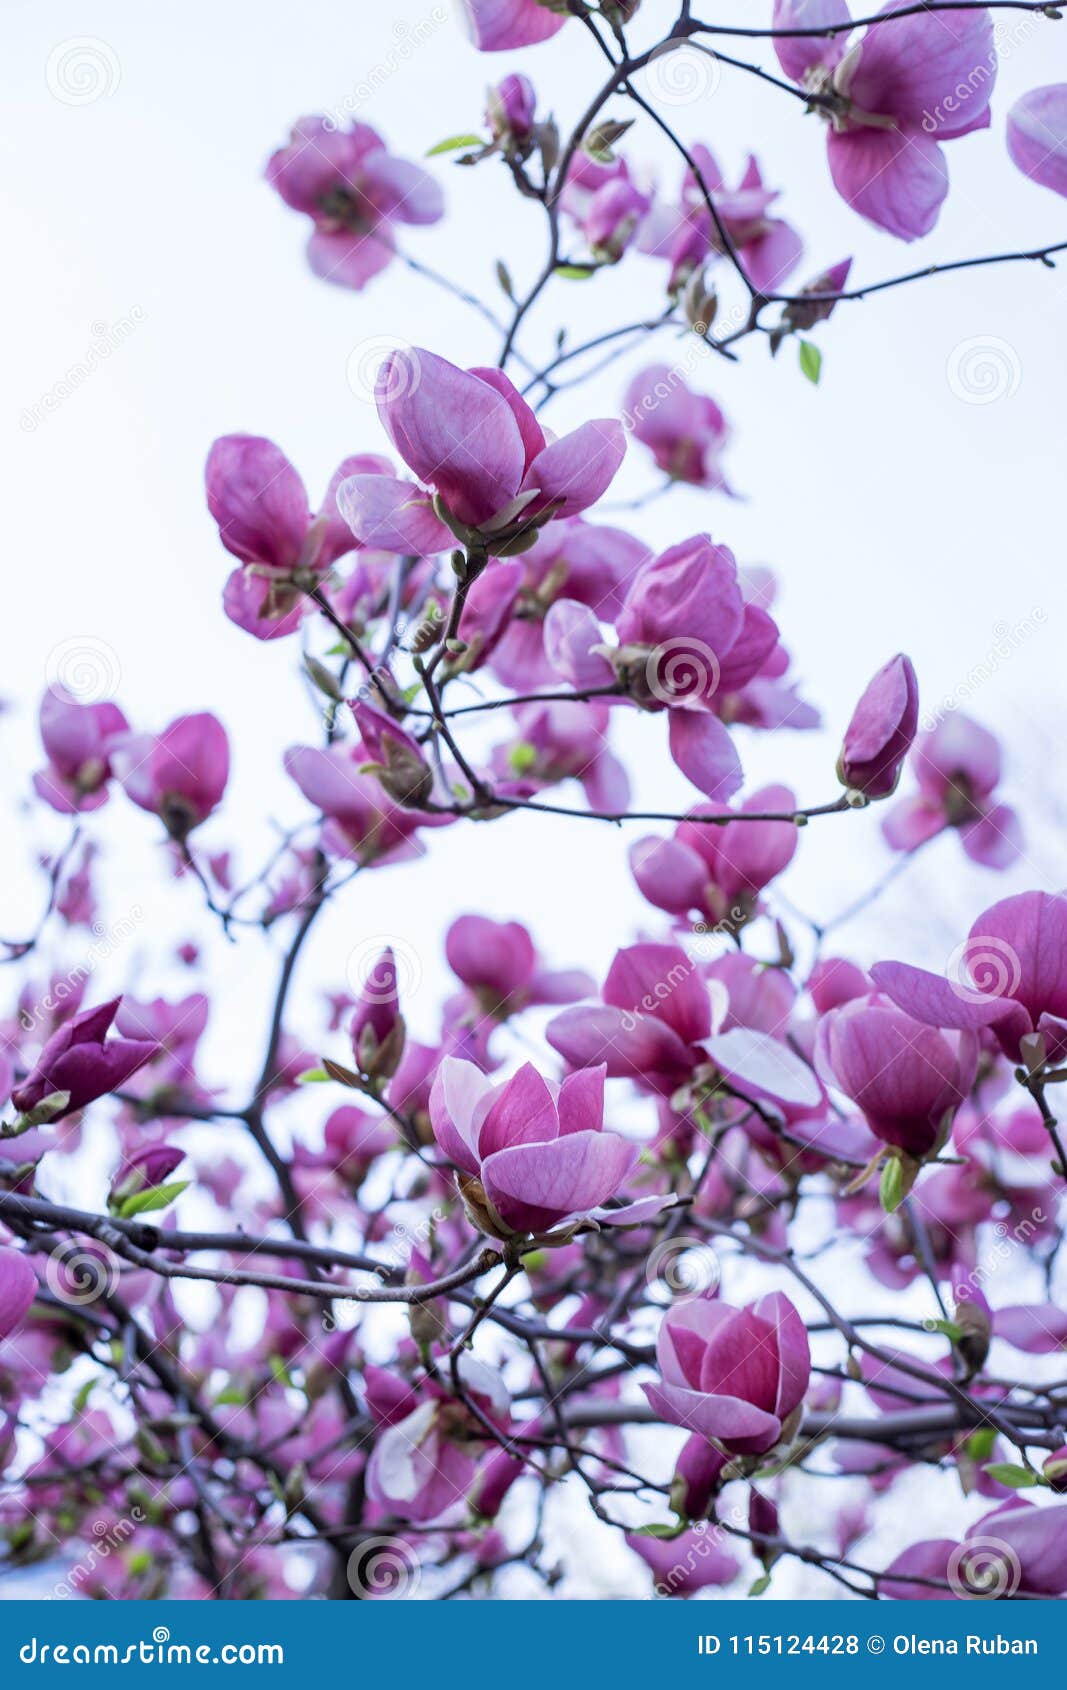 Tree of lilac magnolia stock photo. Image of gift, color - 115124428